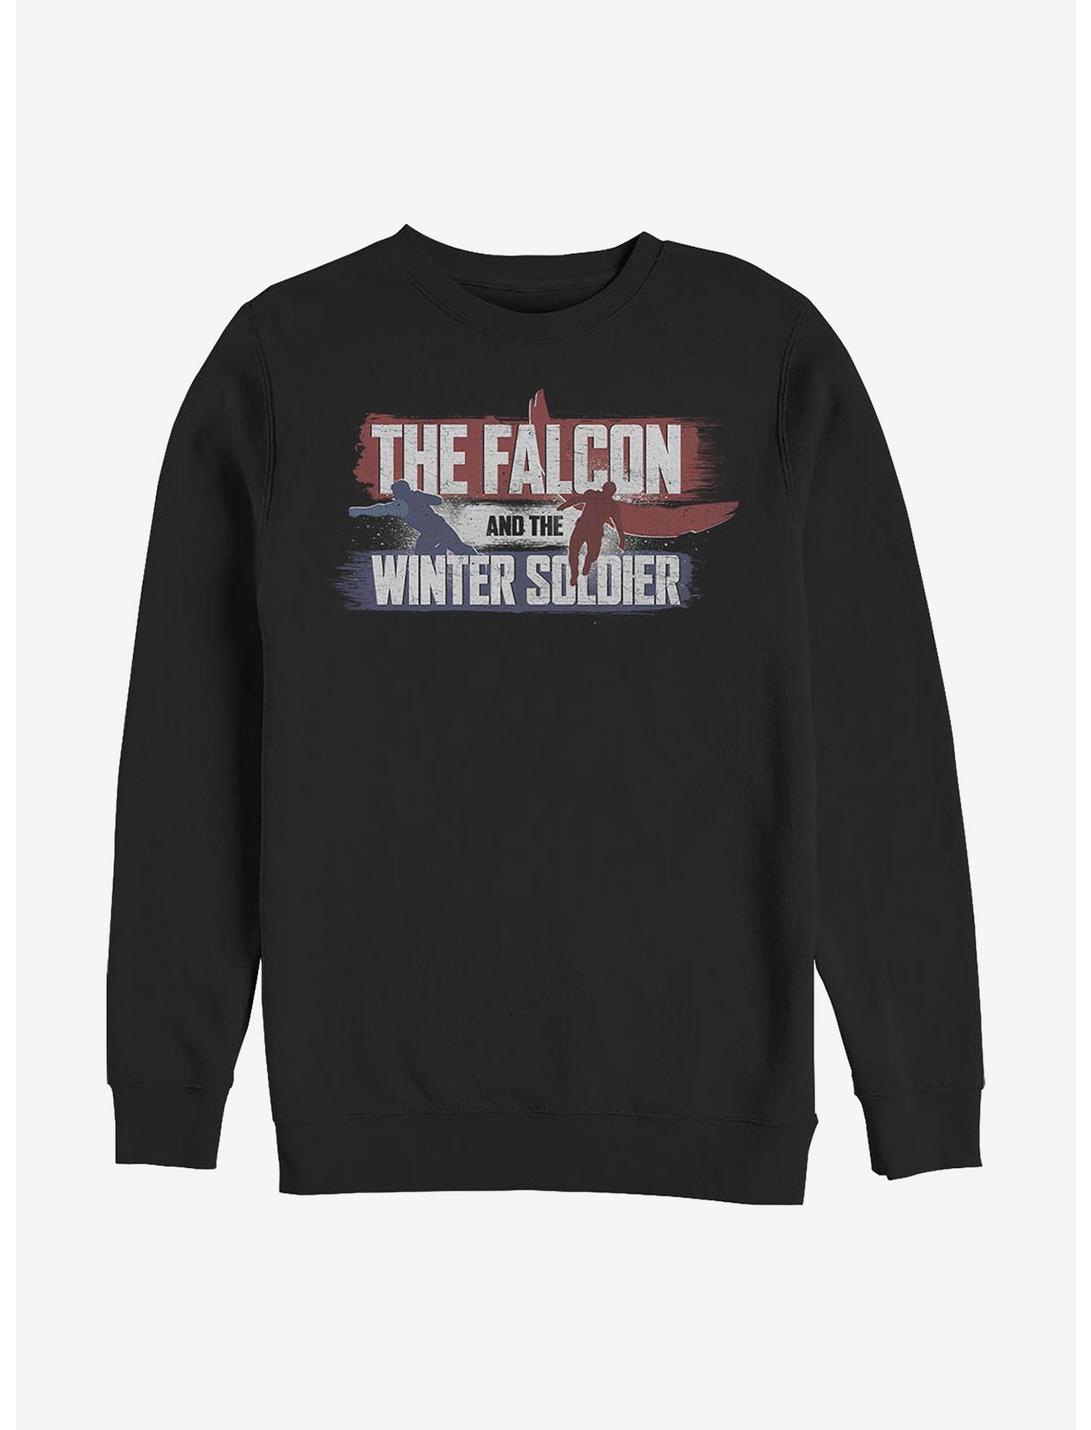 Marvel The Falcon And The Winter Soldier Spray Paint Sweatshirt, BLACK, hi-res